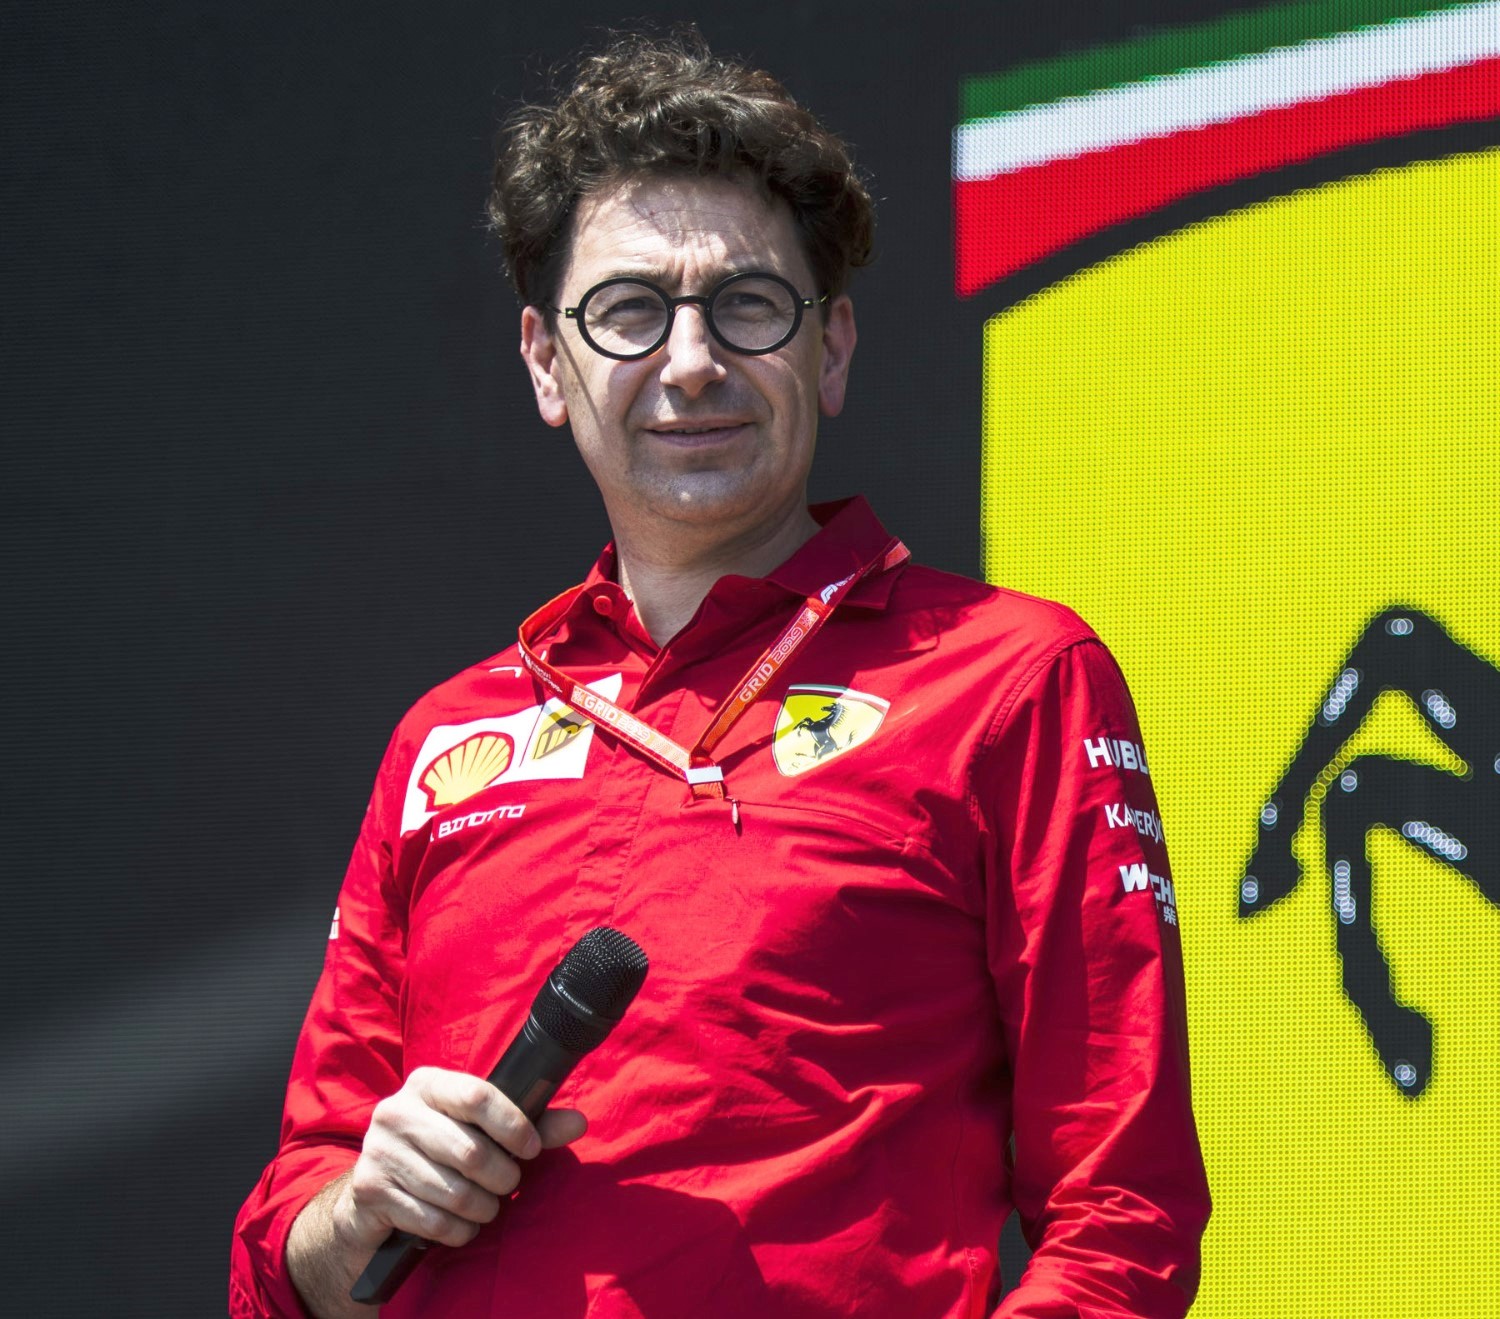 Binotto has nerve criticizing Vettel when the car he designs and builds is inferior